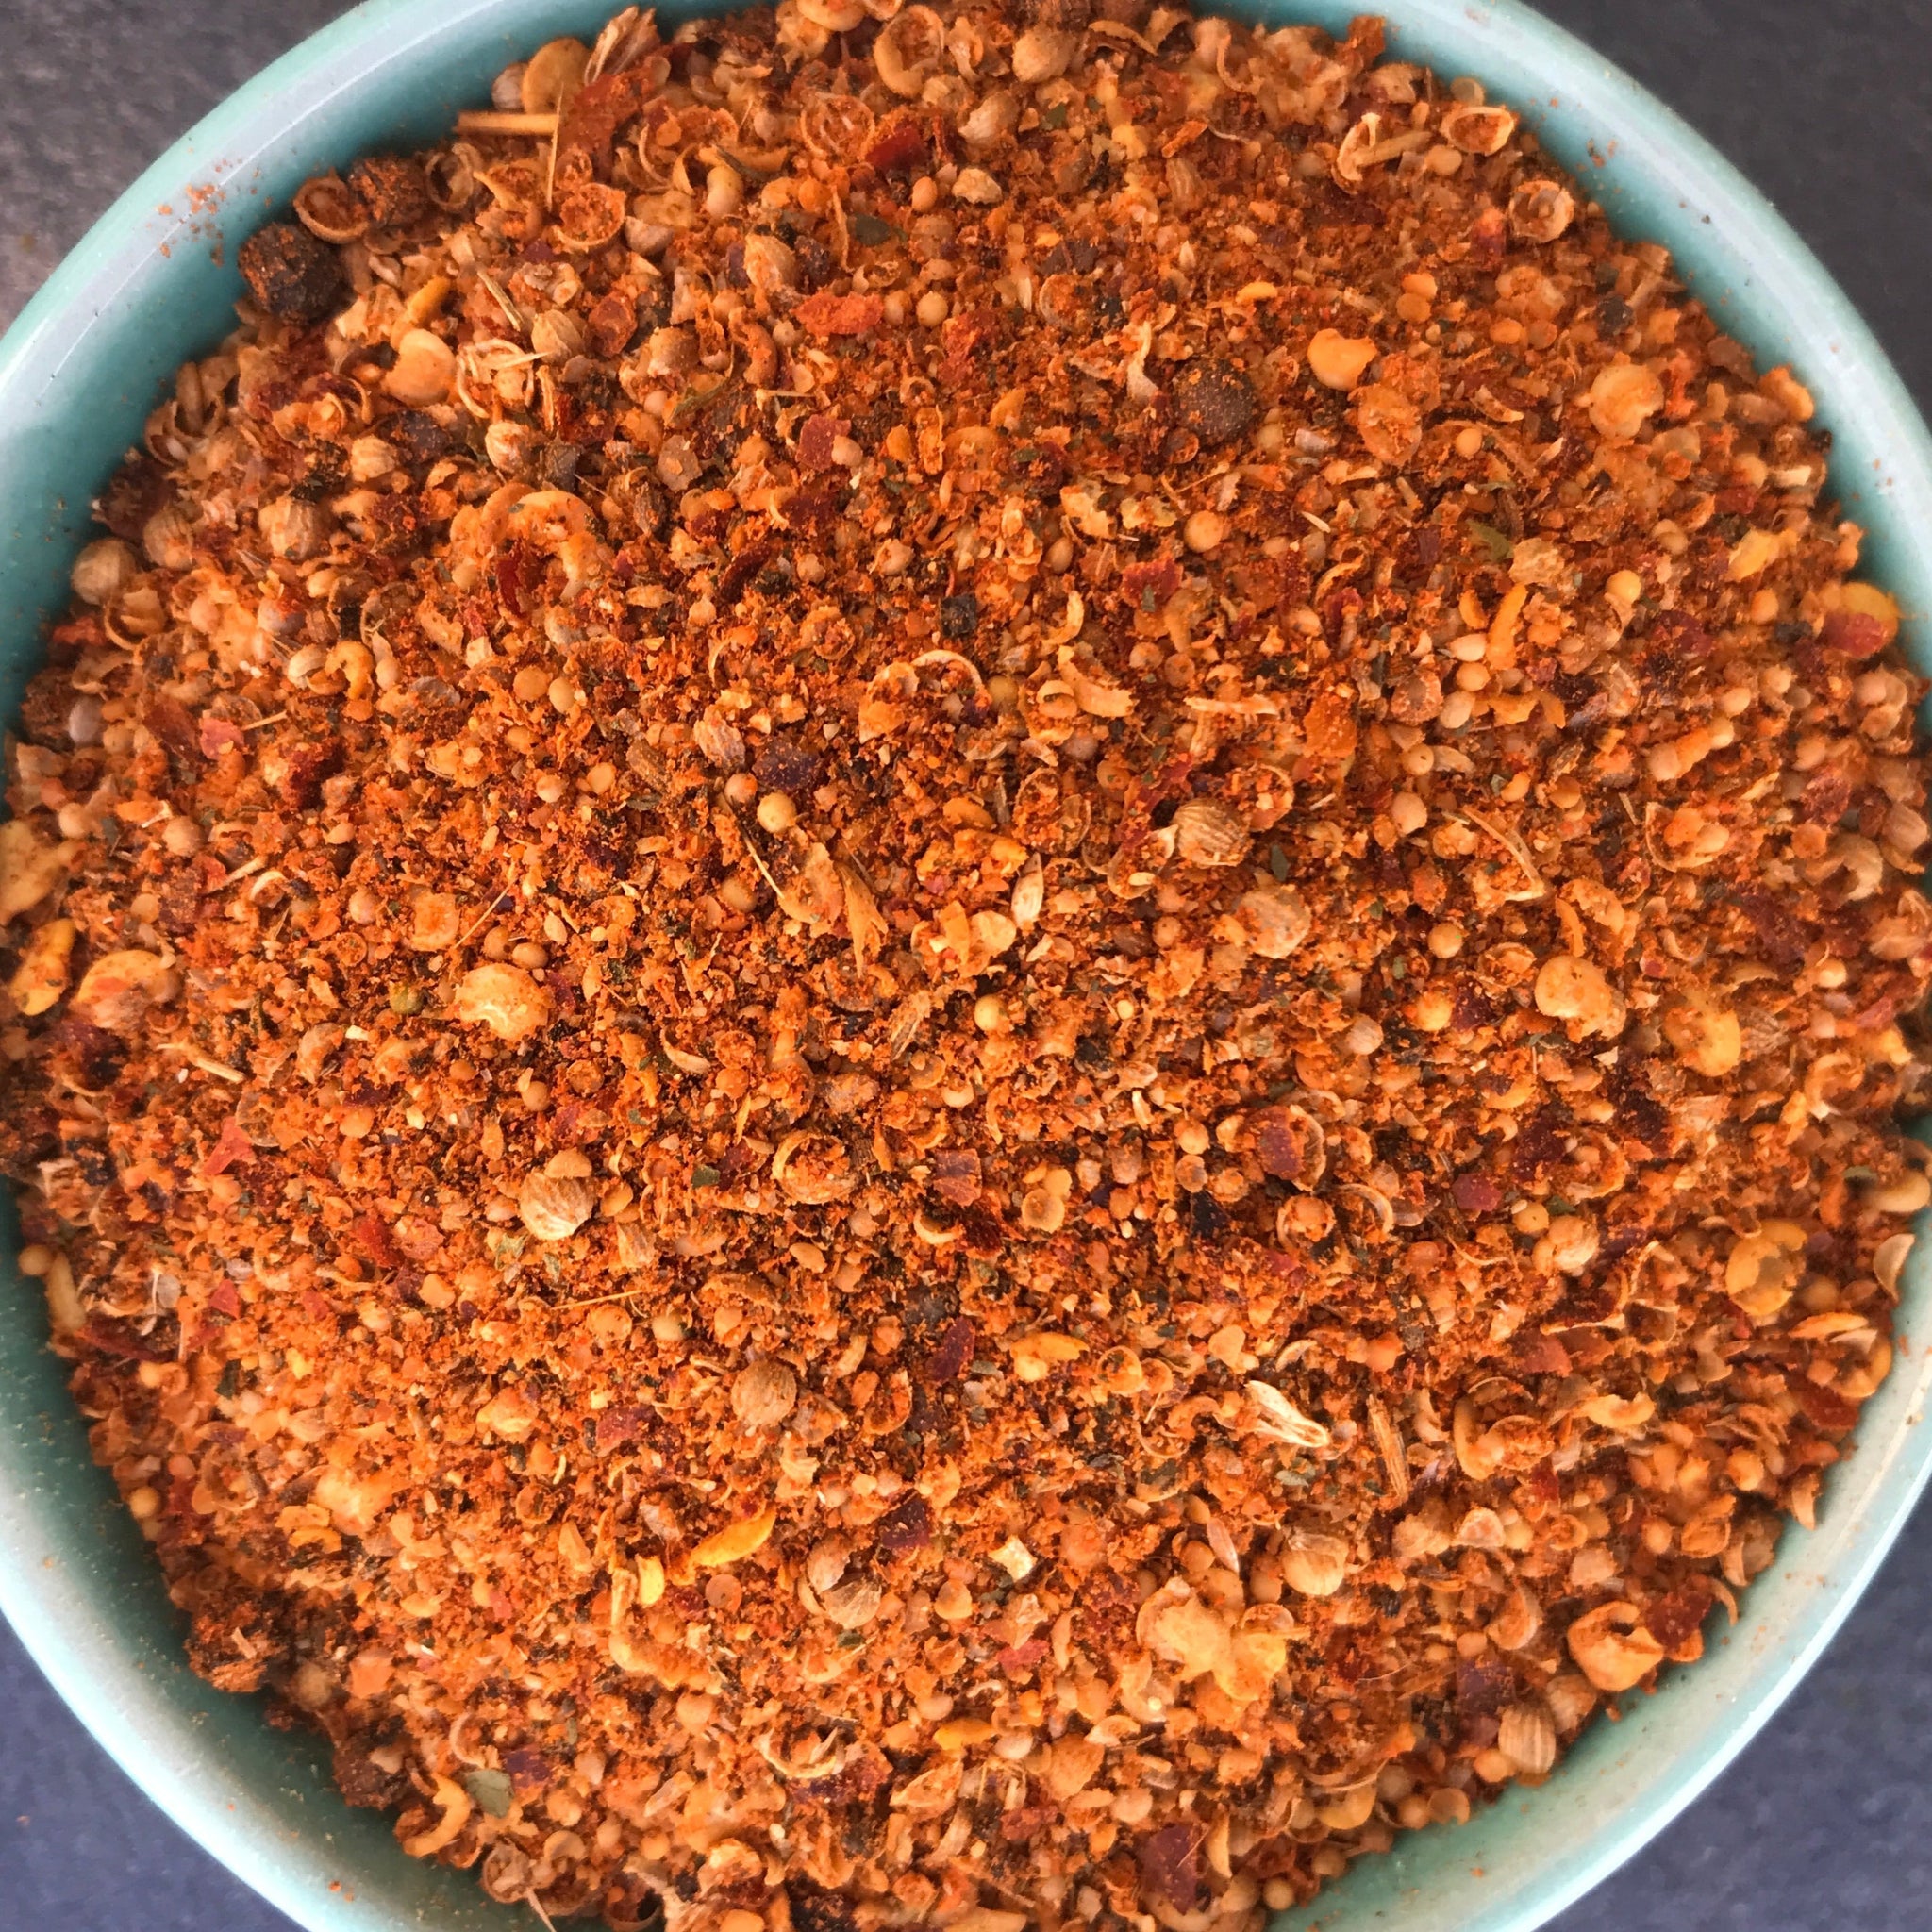 "Thessaloniki" Old Traditional Spice Mix